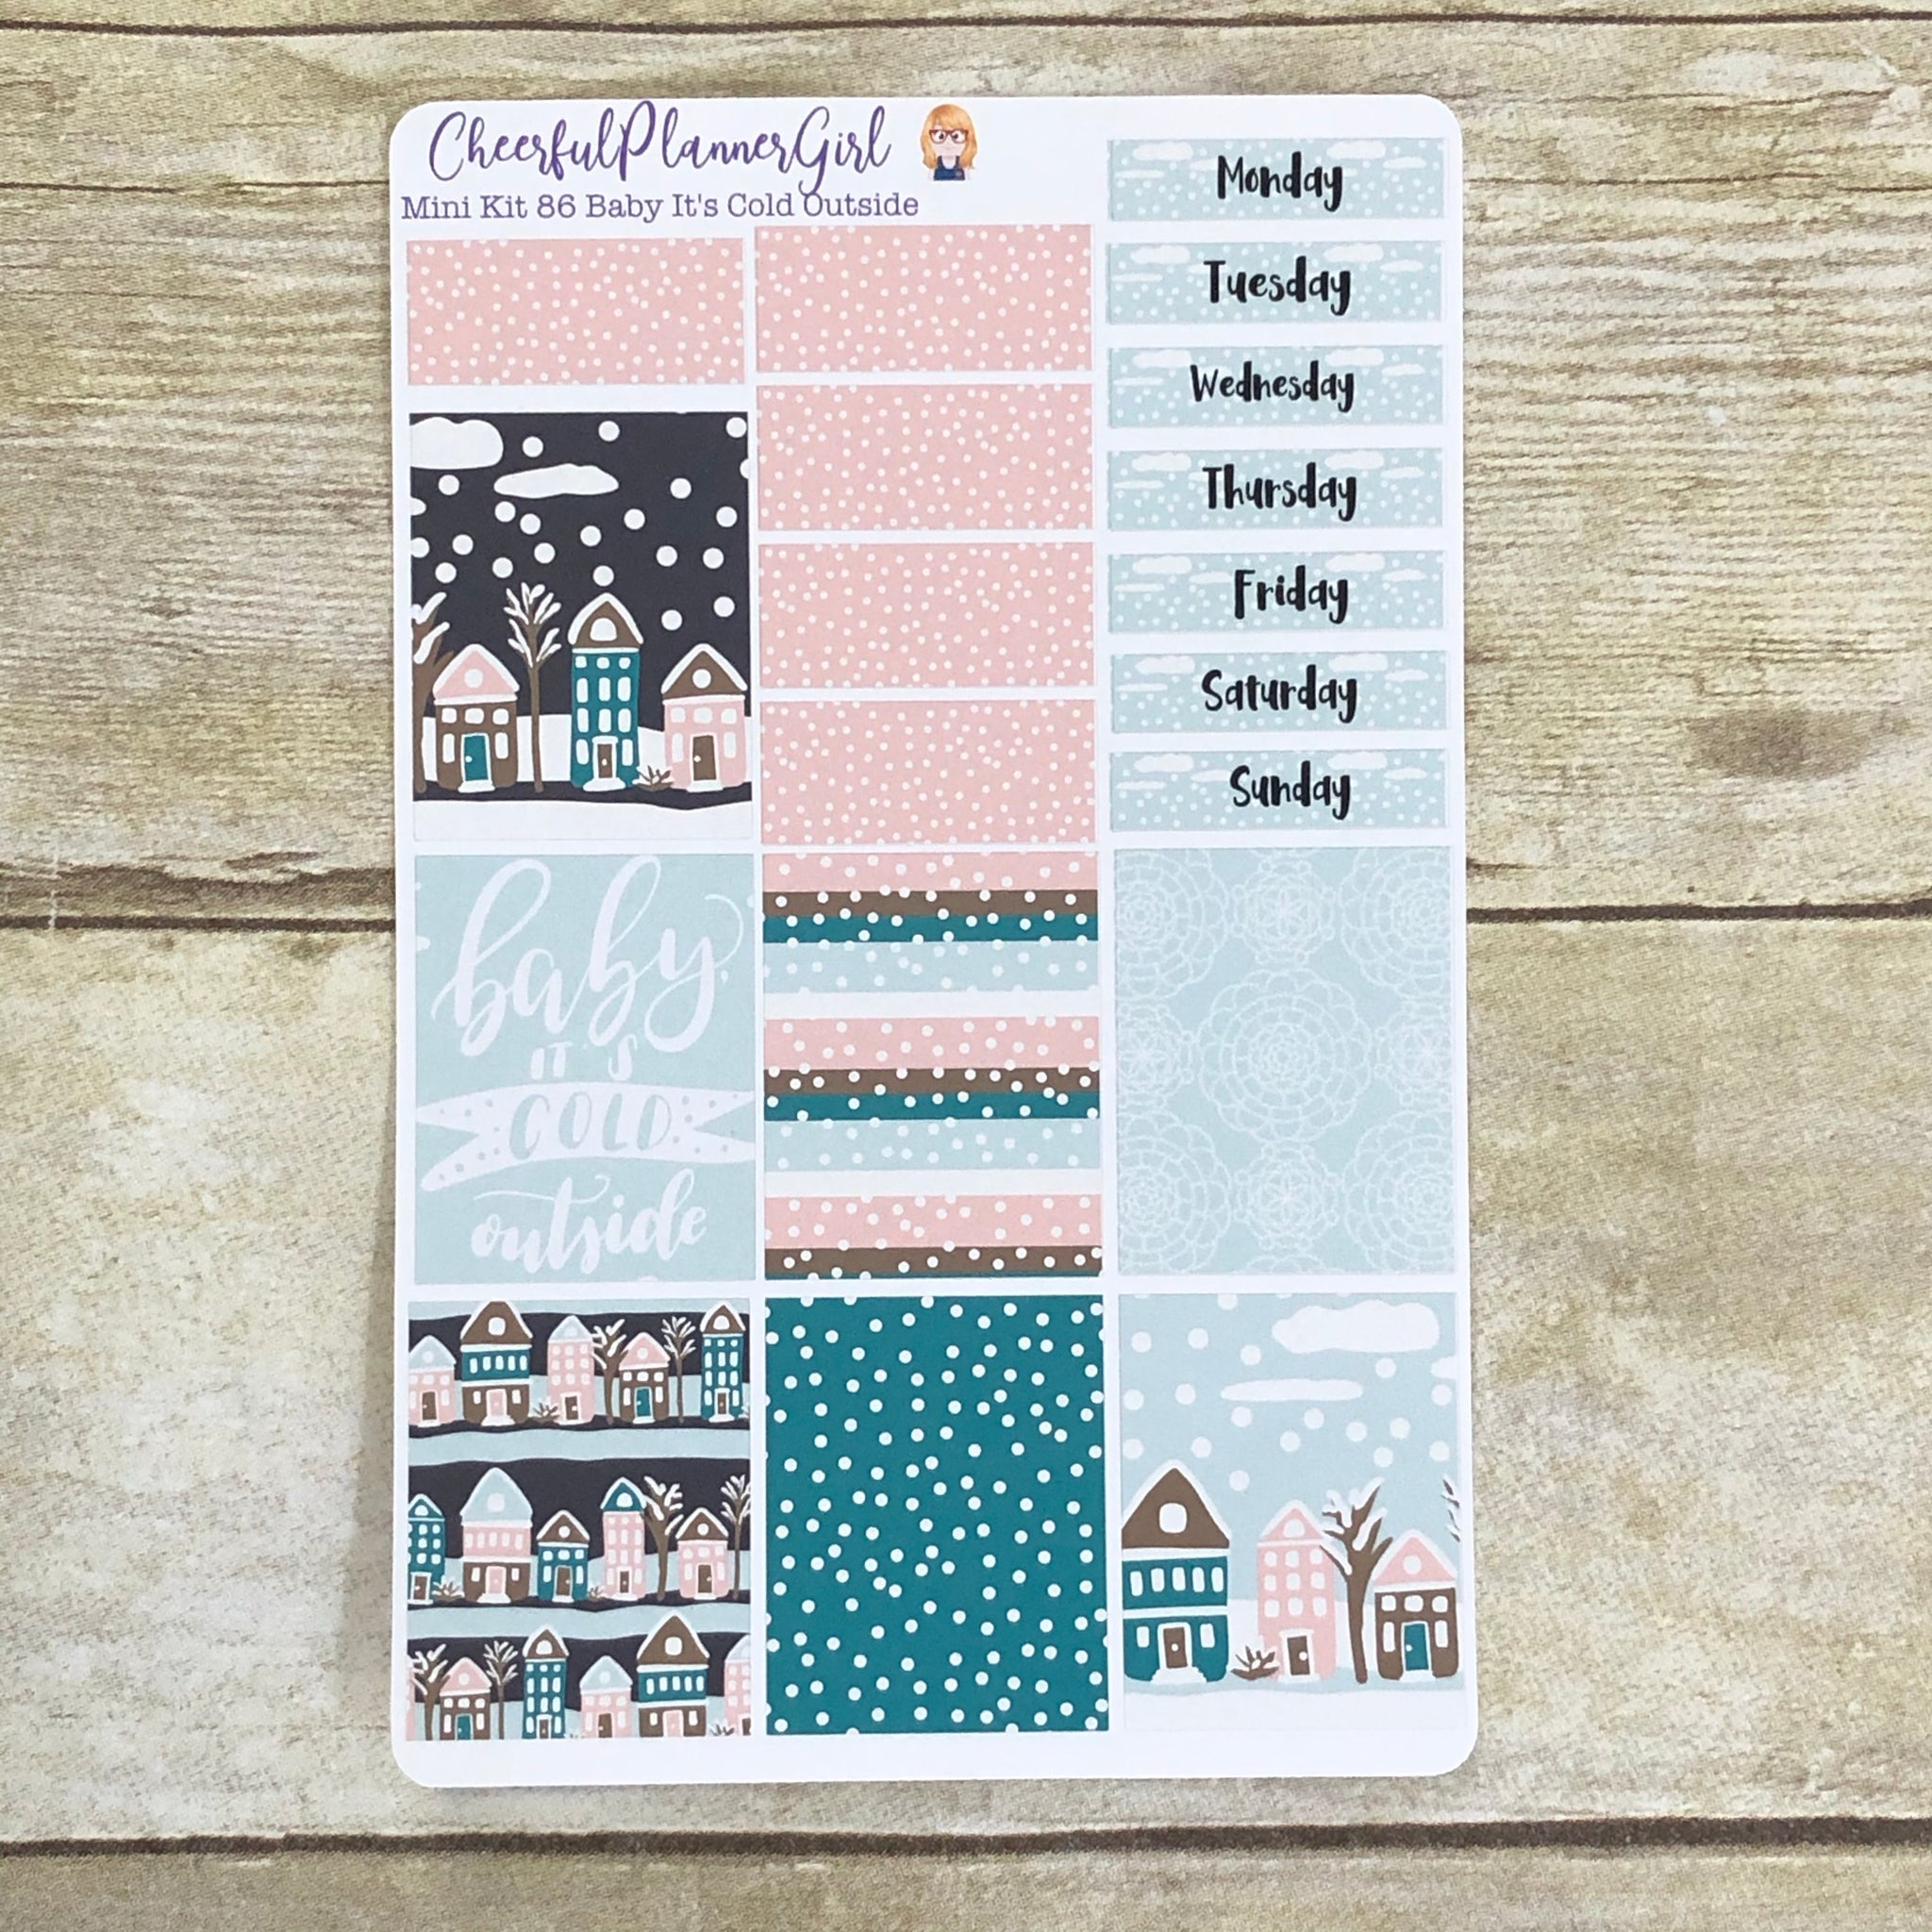 Baby It’s Cold Outside Mini Kit Weekly Layout Planner Stickers